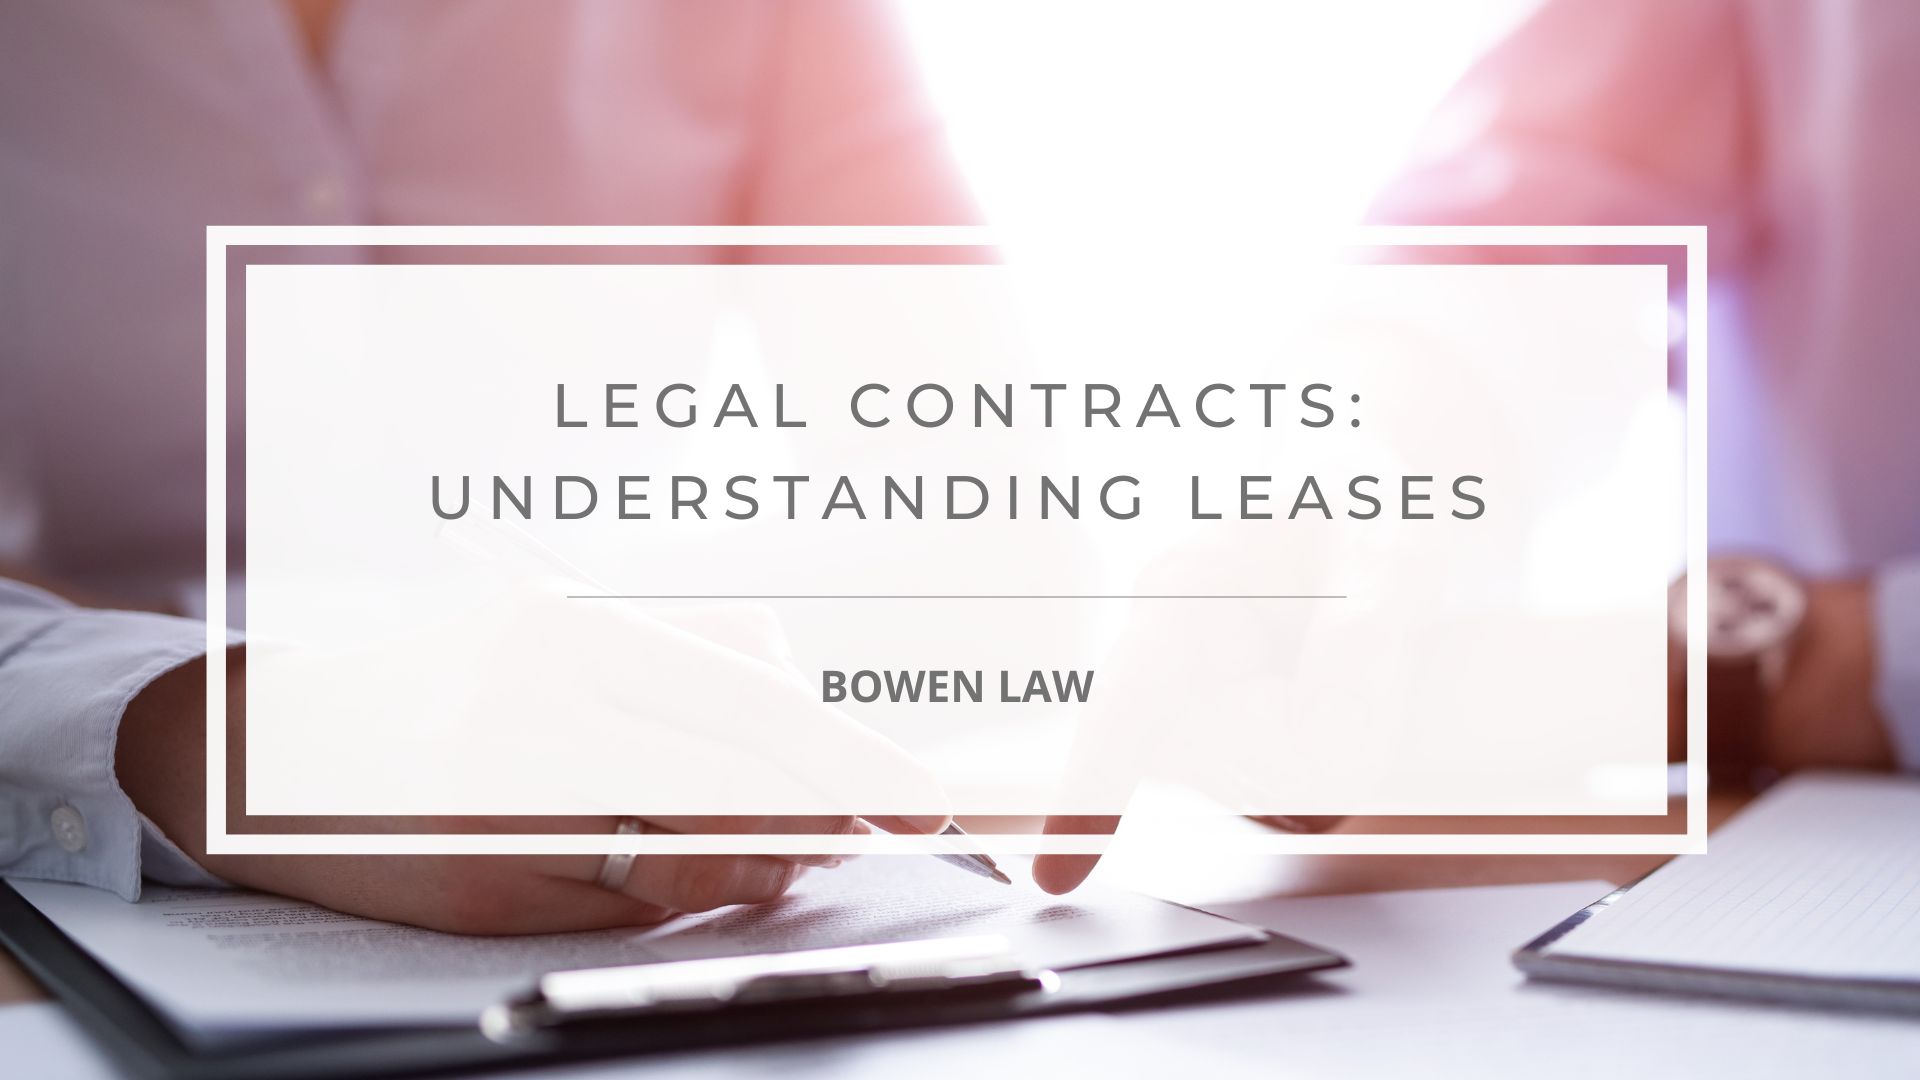 Featured image of legal contracts: understanding leases